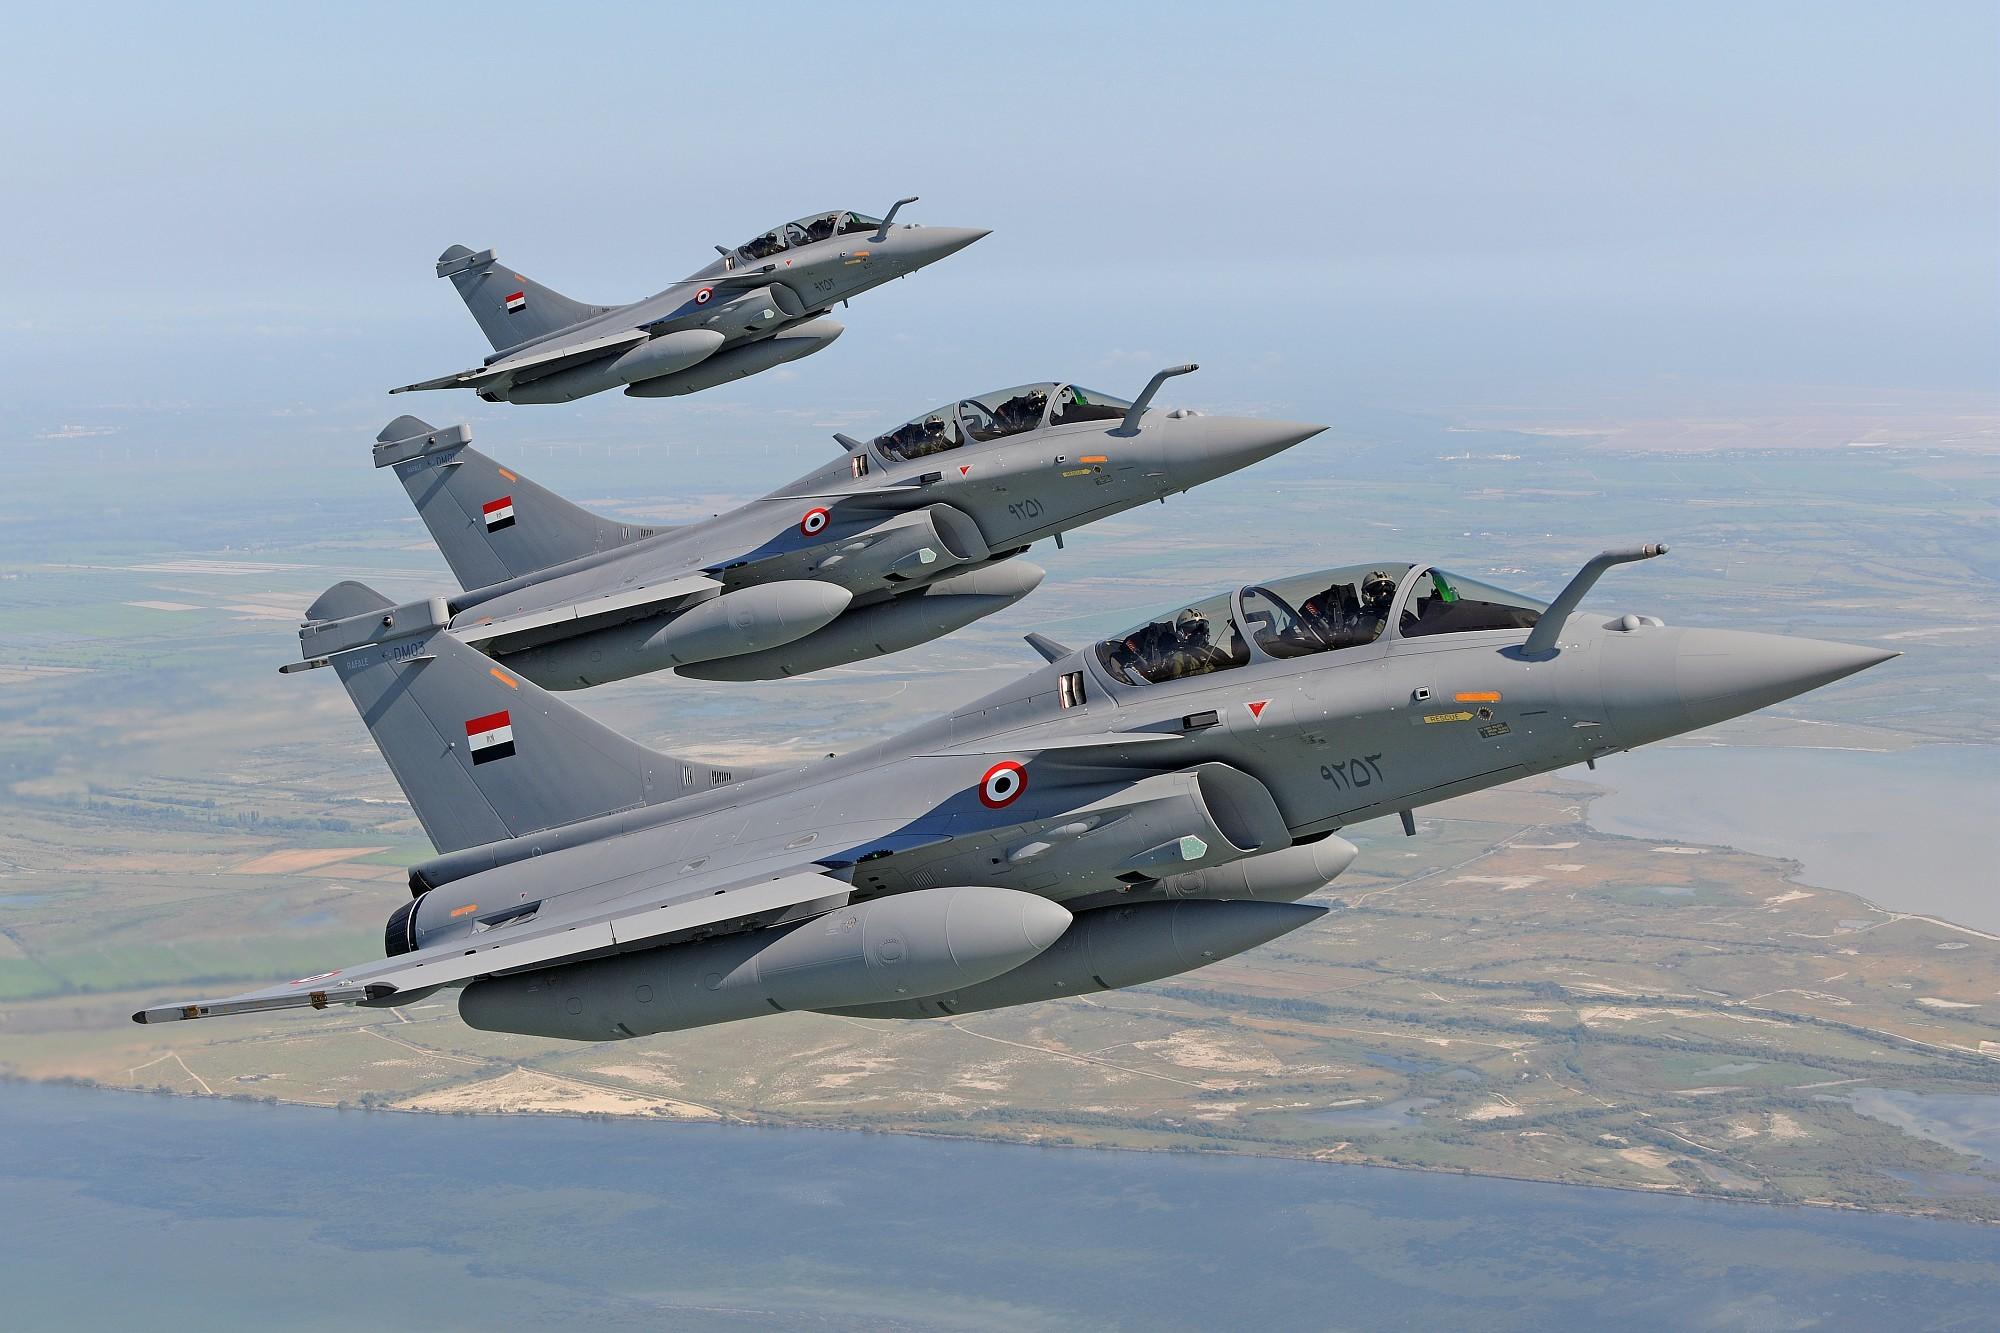 Dassault Aviation has announced that The Arab Republic of Egypt will purchase an additional 30 Rafales to equip its air force